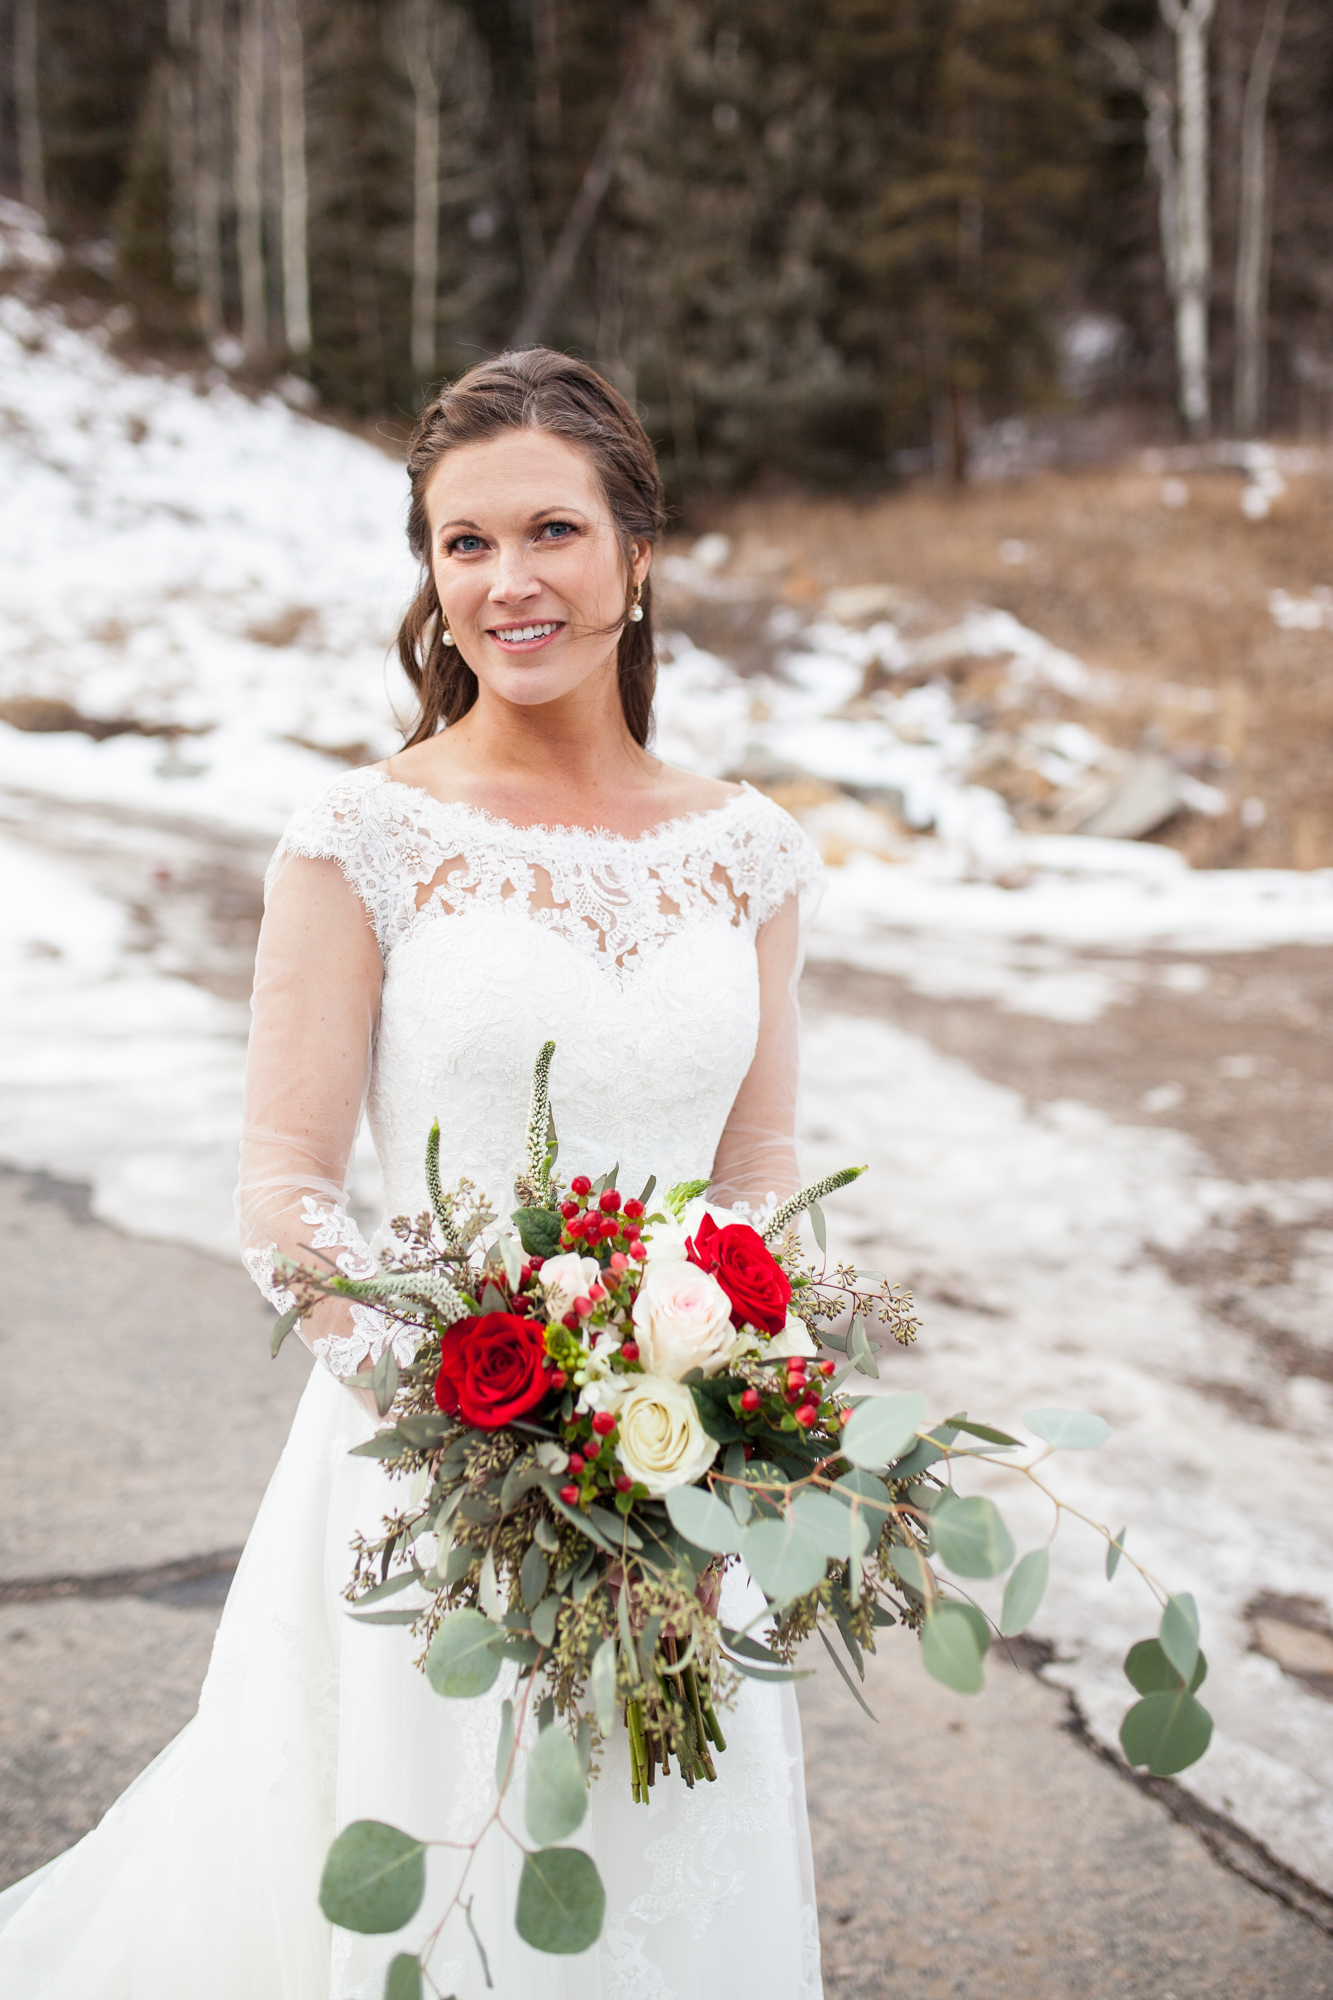 winter bride ideas with long sleeve lace sweetheart wedding dress and red rose bouquet in the snow